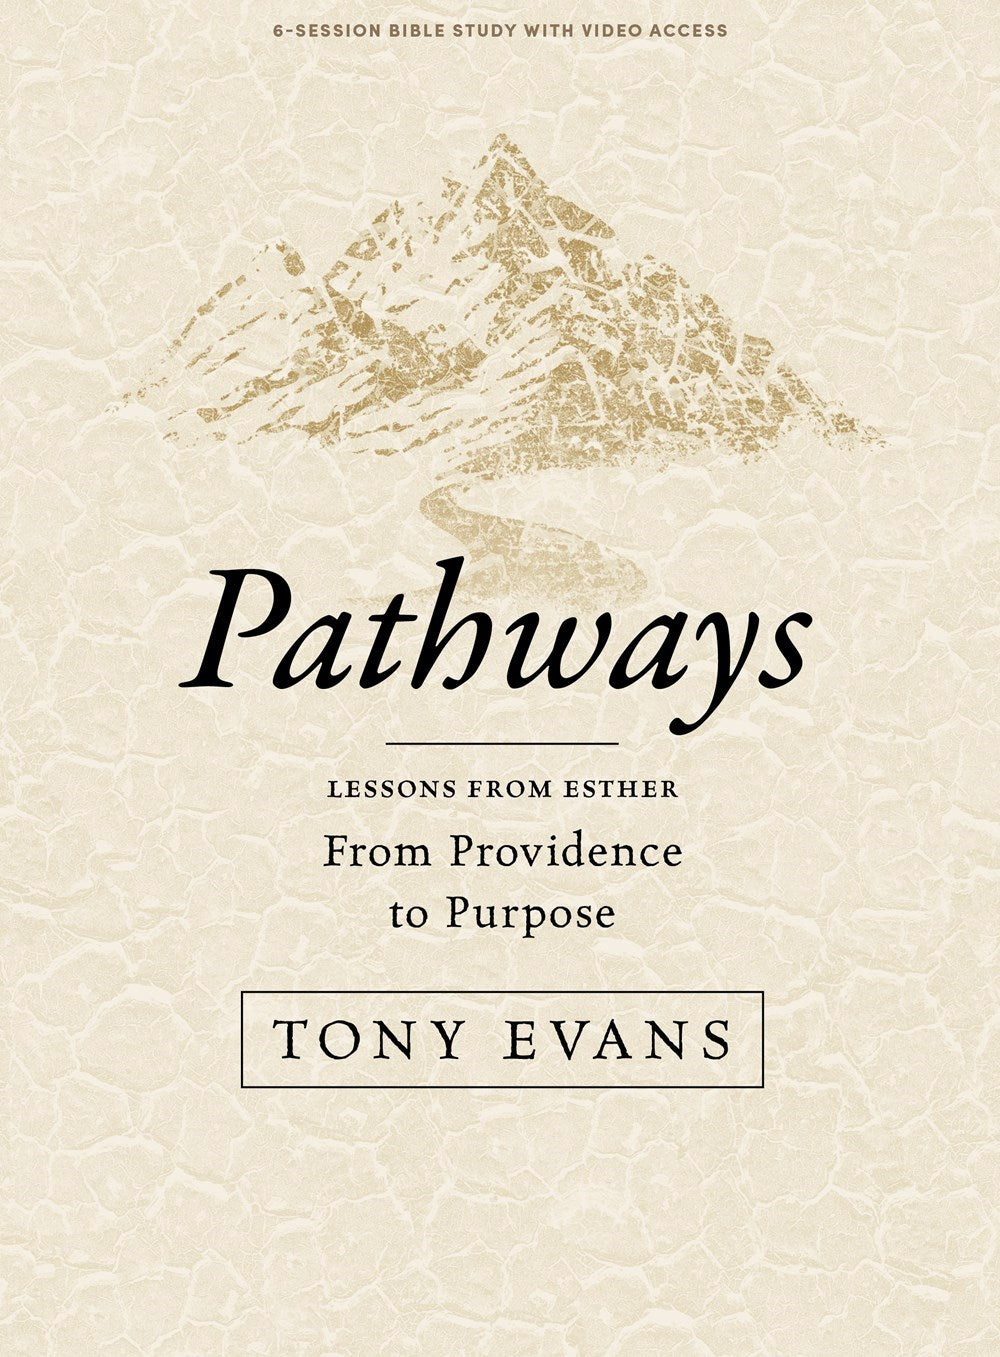 Pathways Bible Study Book with Video Access